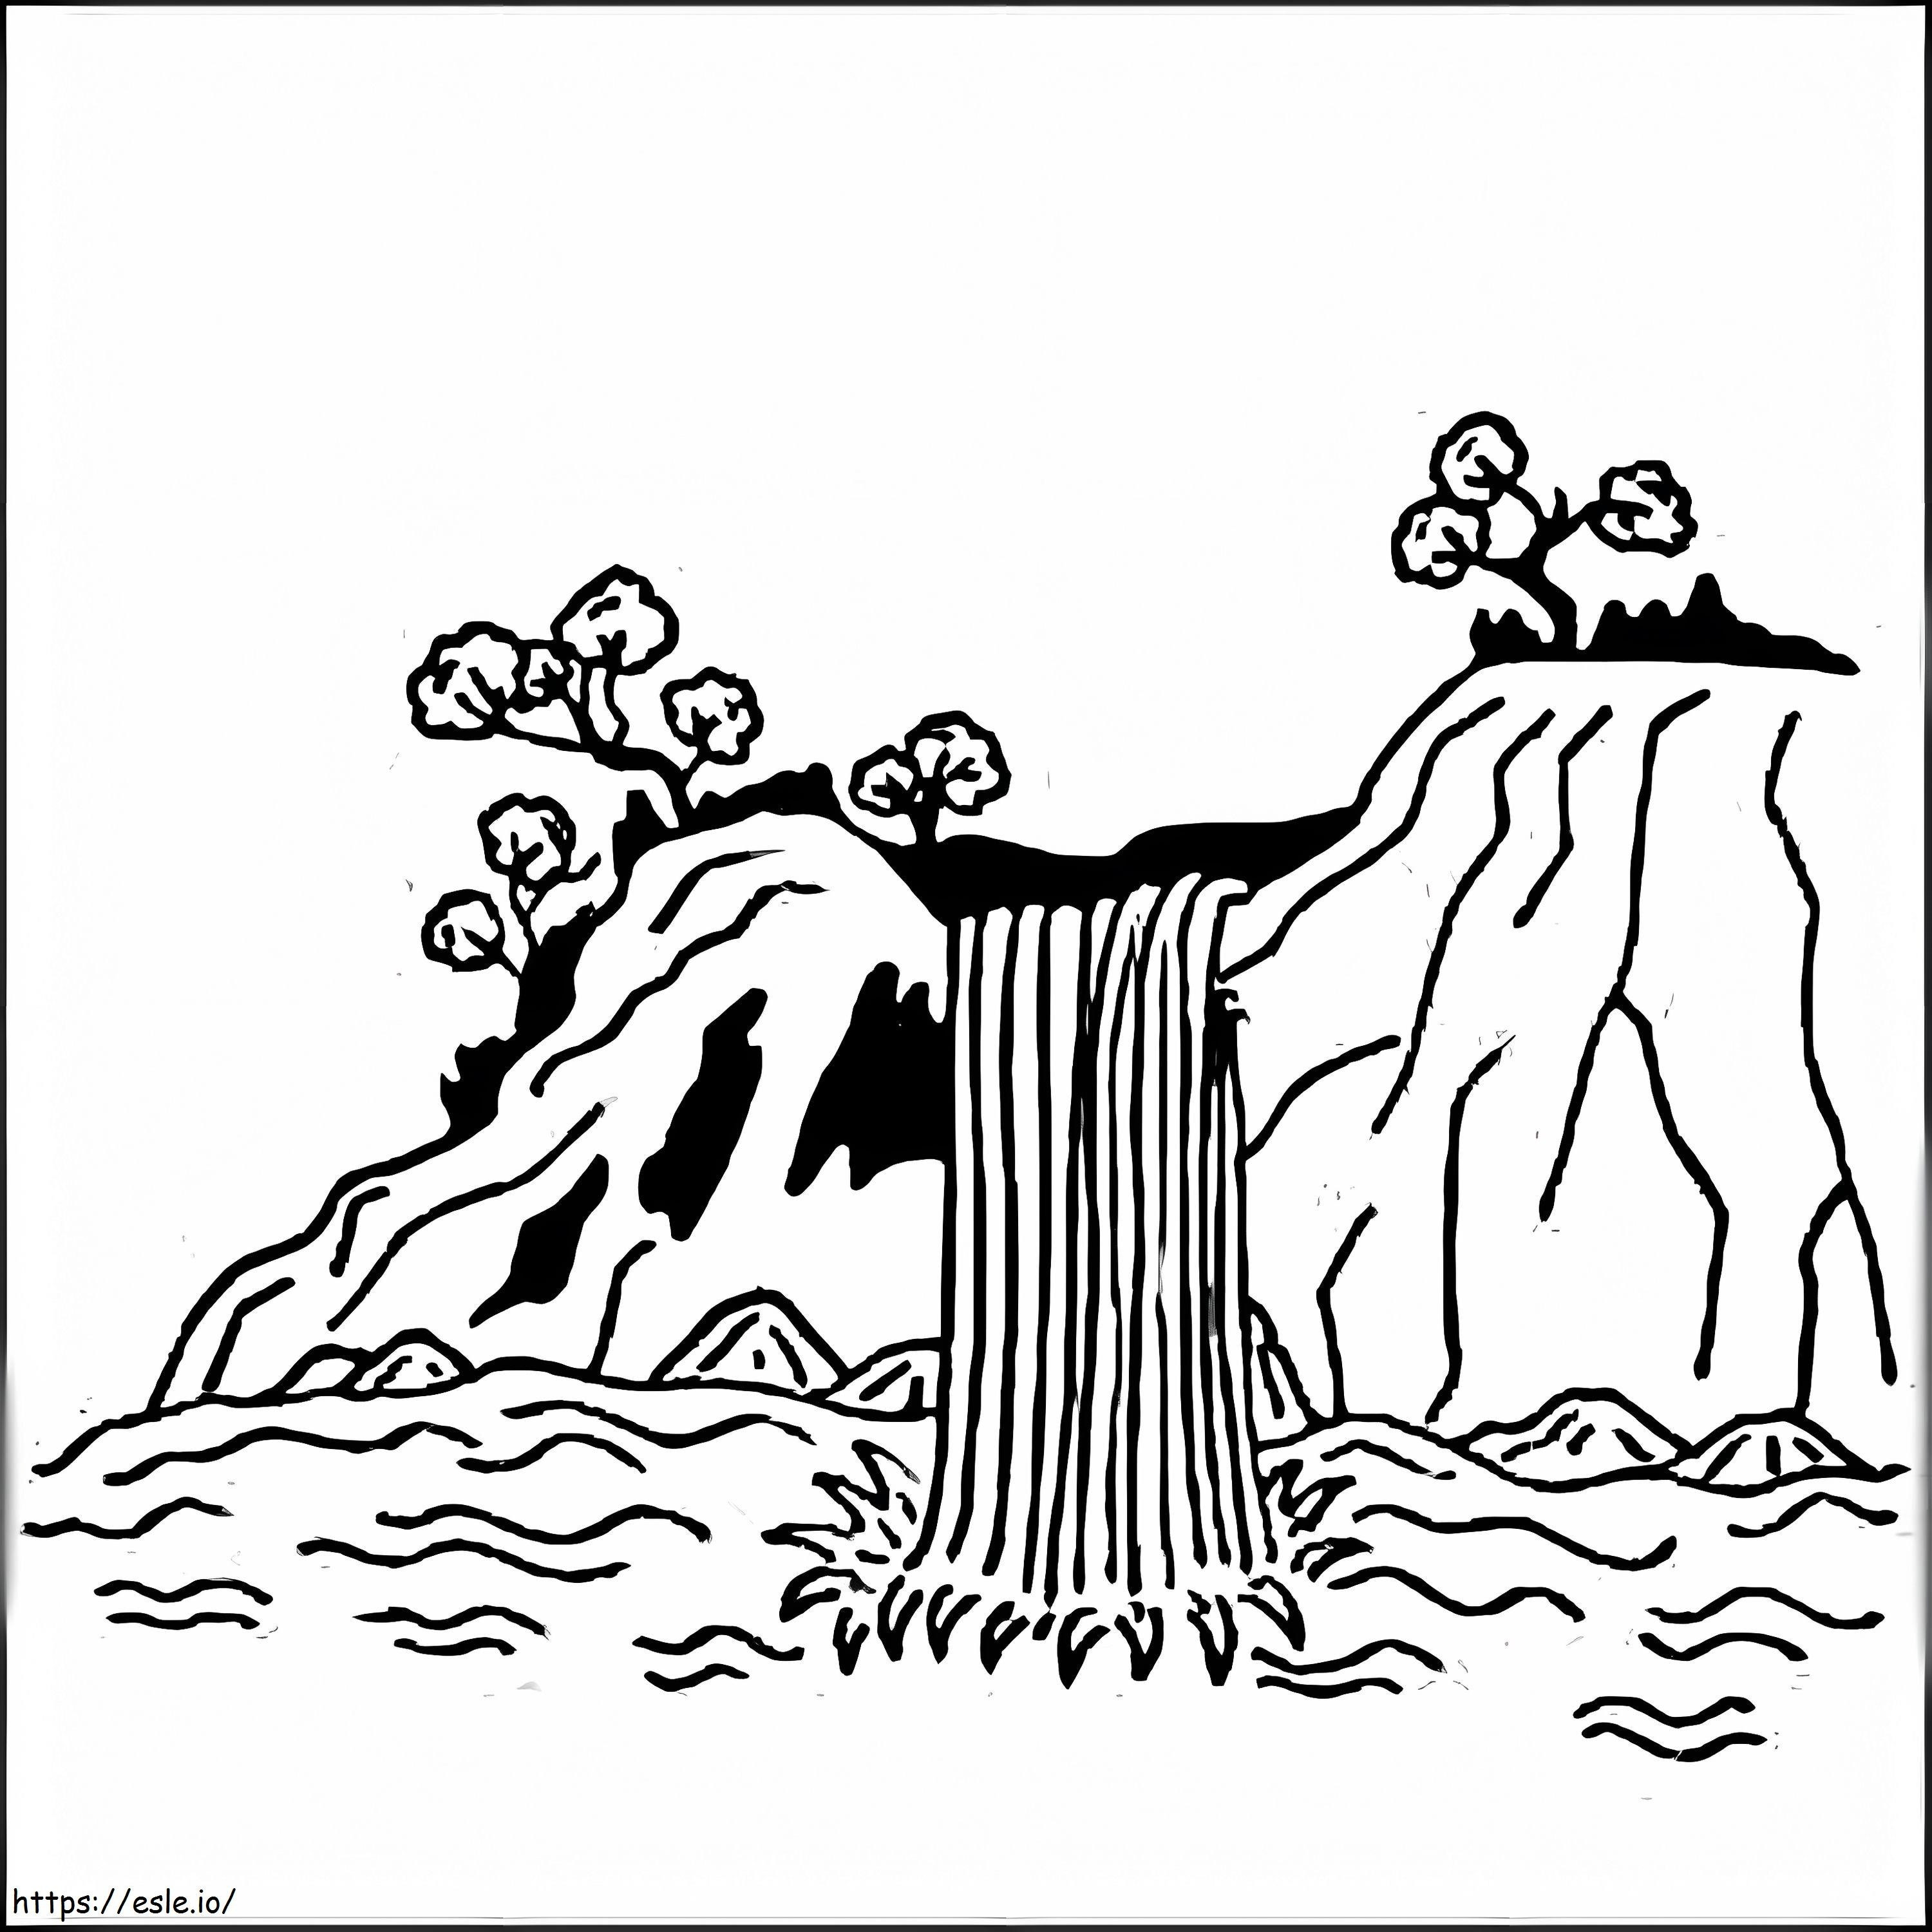 Waterfall 10 coloring page